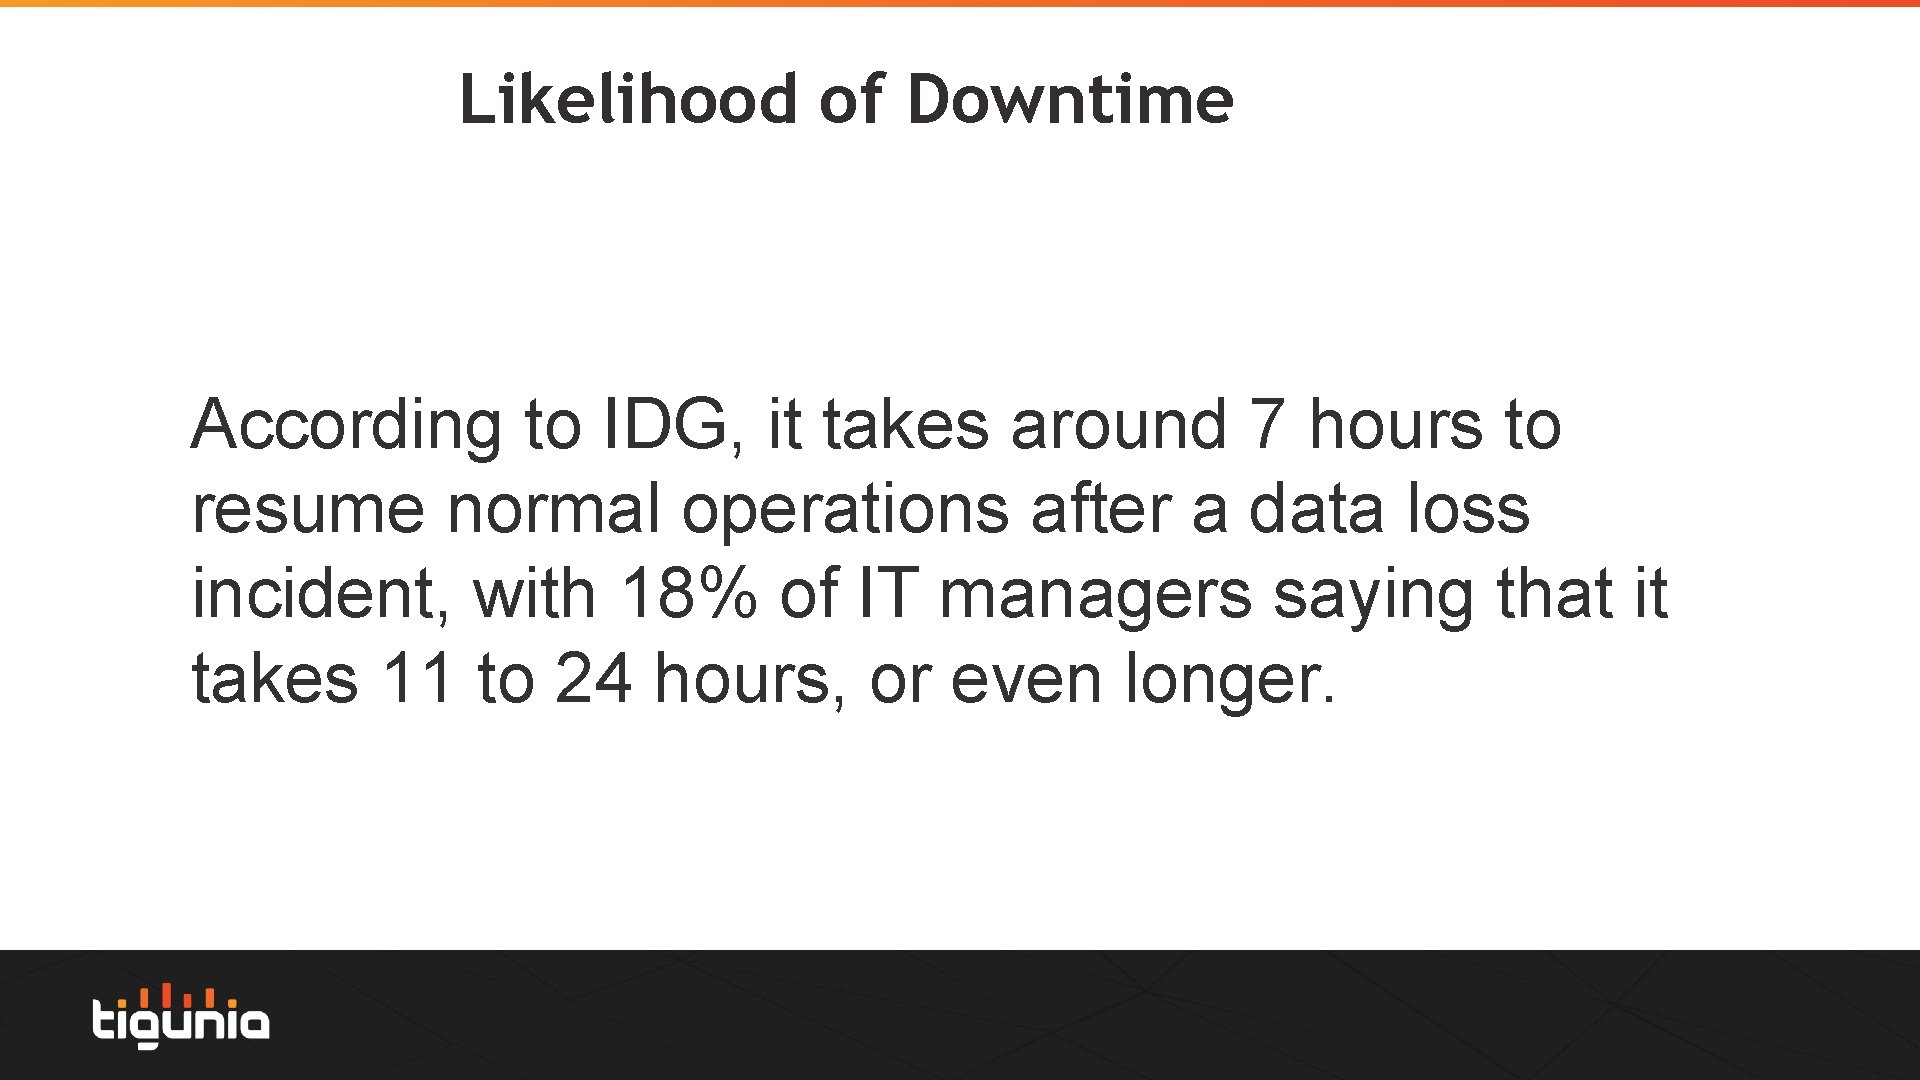 Likelihood of Downtime According to IDG, it takes around 7 hours to resume normal